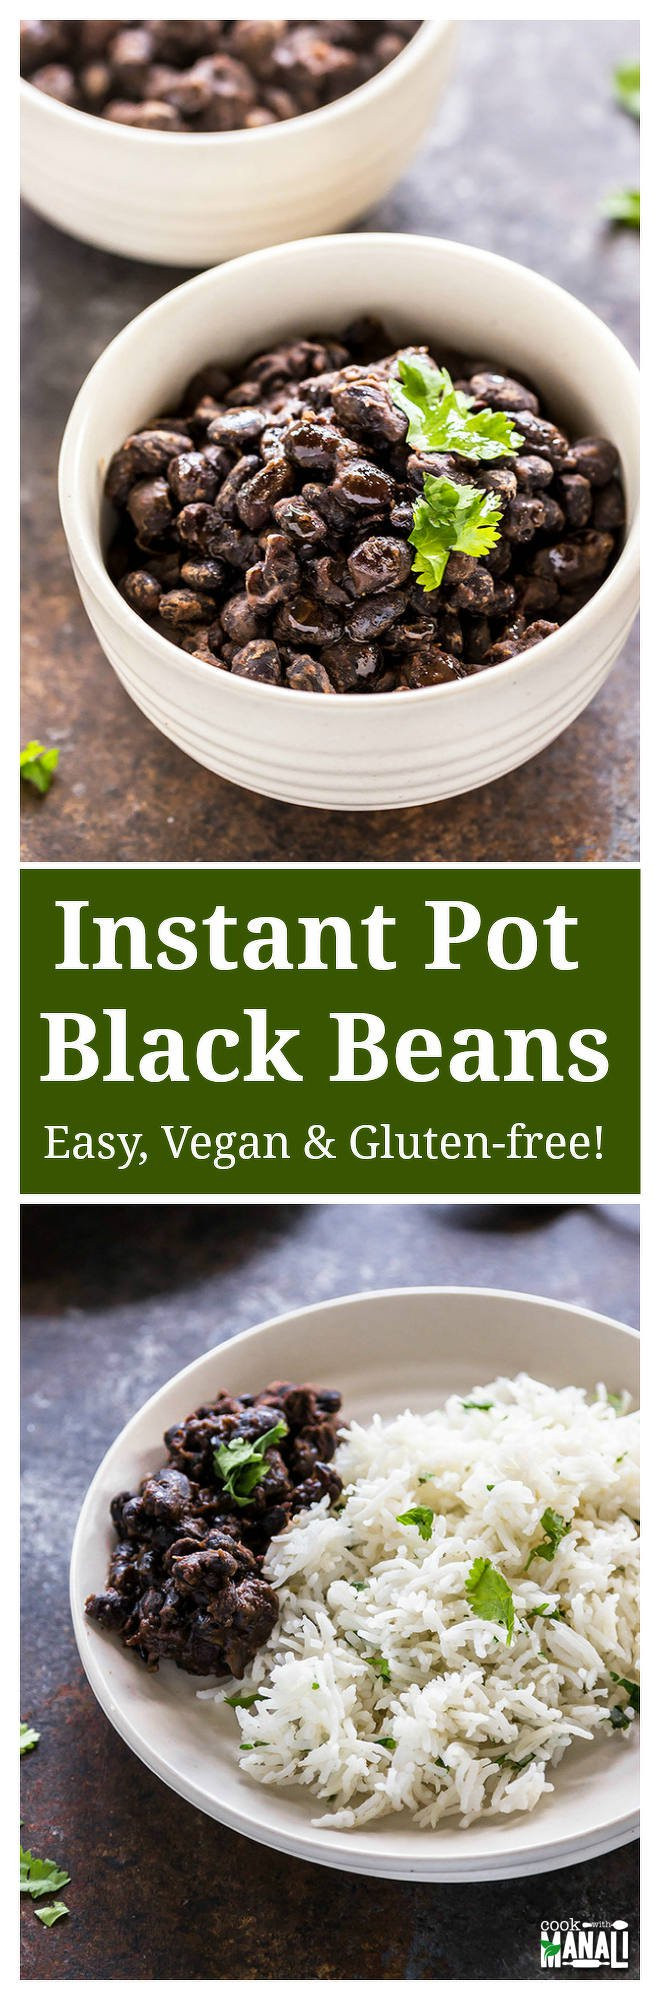 Black Beans And Rice Instant Pot
 Instant Pot Black Beans Cook With Manali